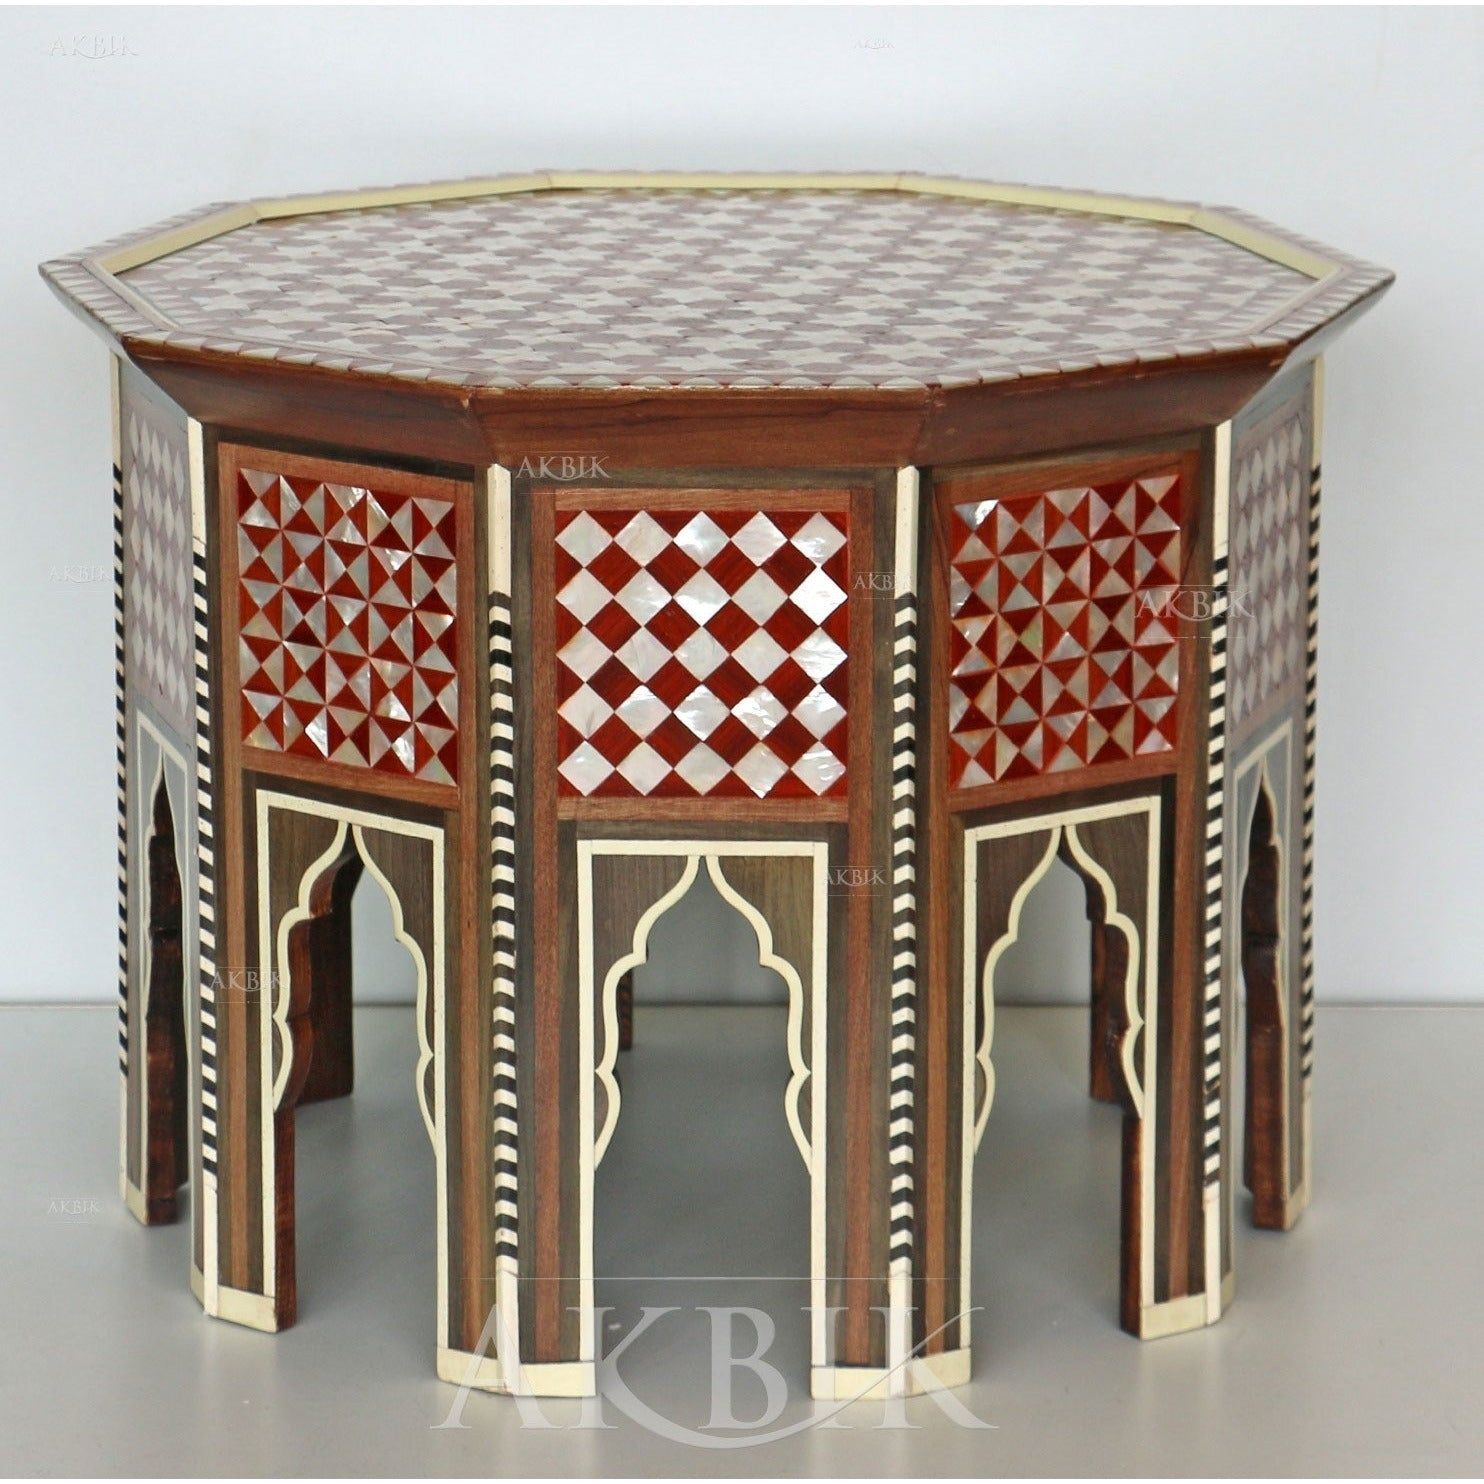 MOROCCAN STARS STYLE PALACE SIZE SIDE TABLE - AKBIK Furniture & Design